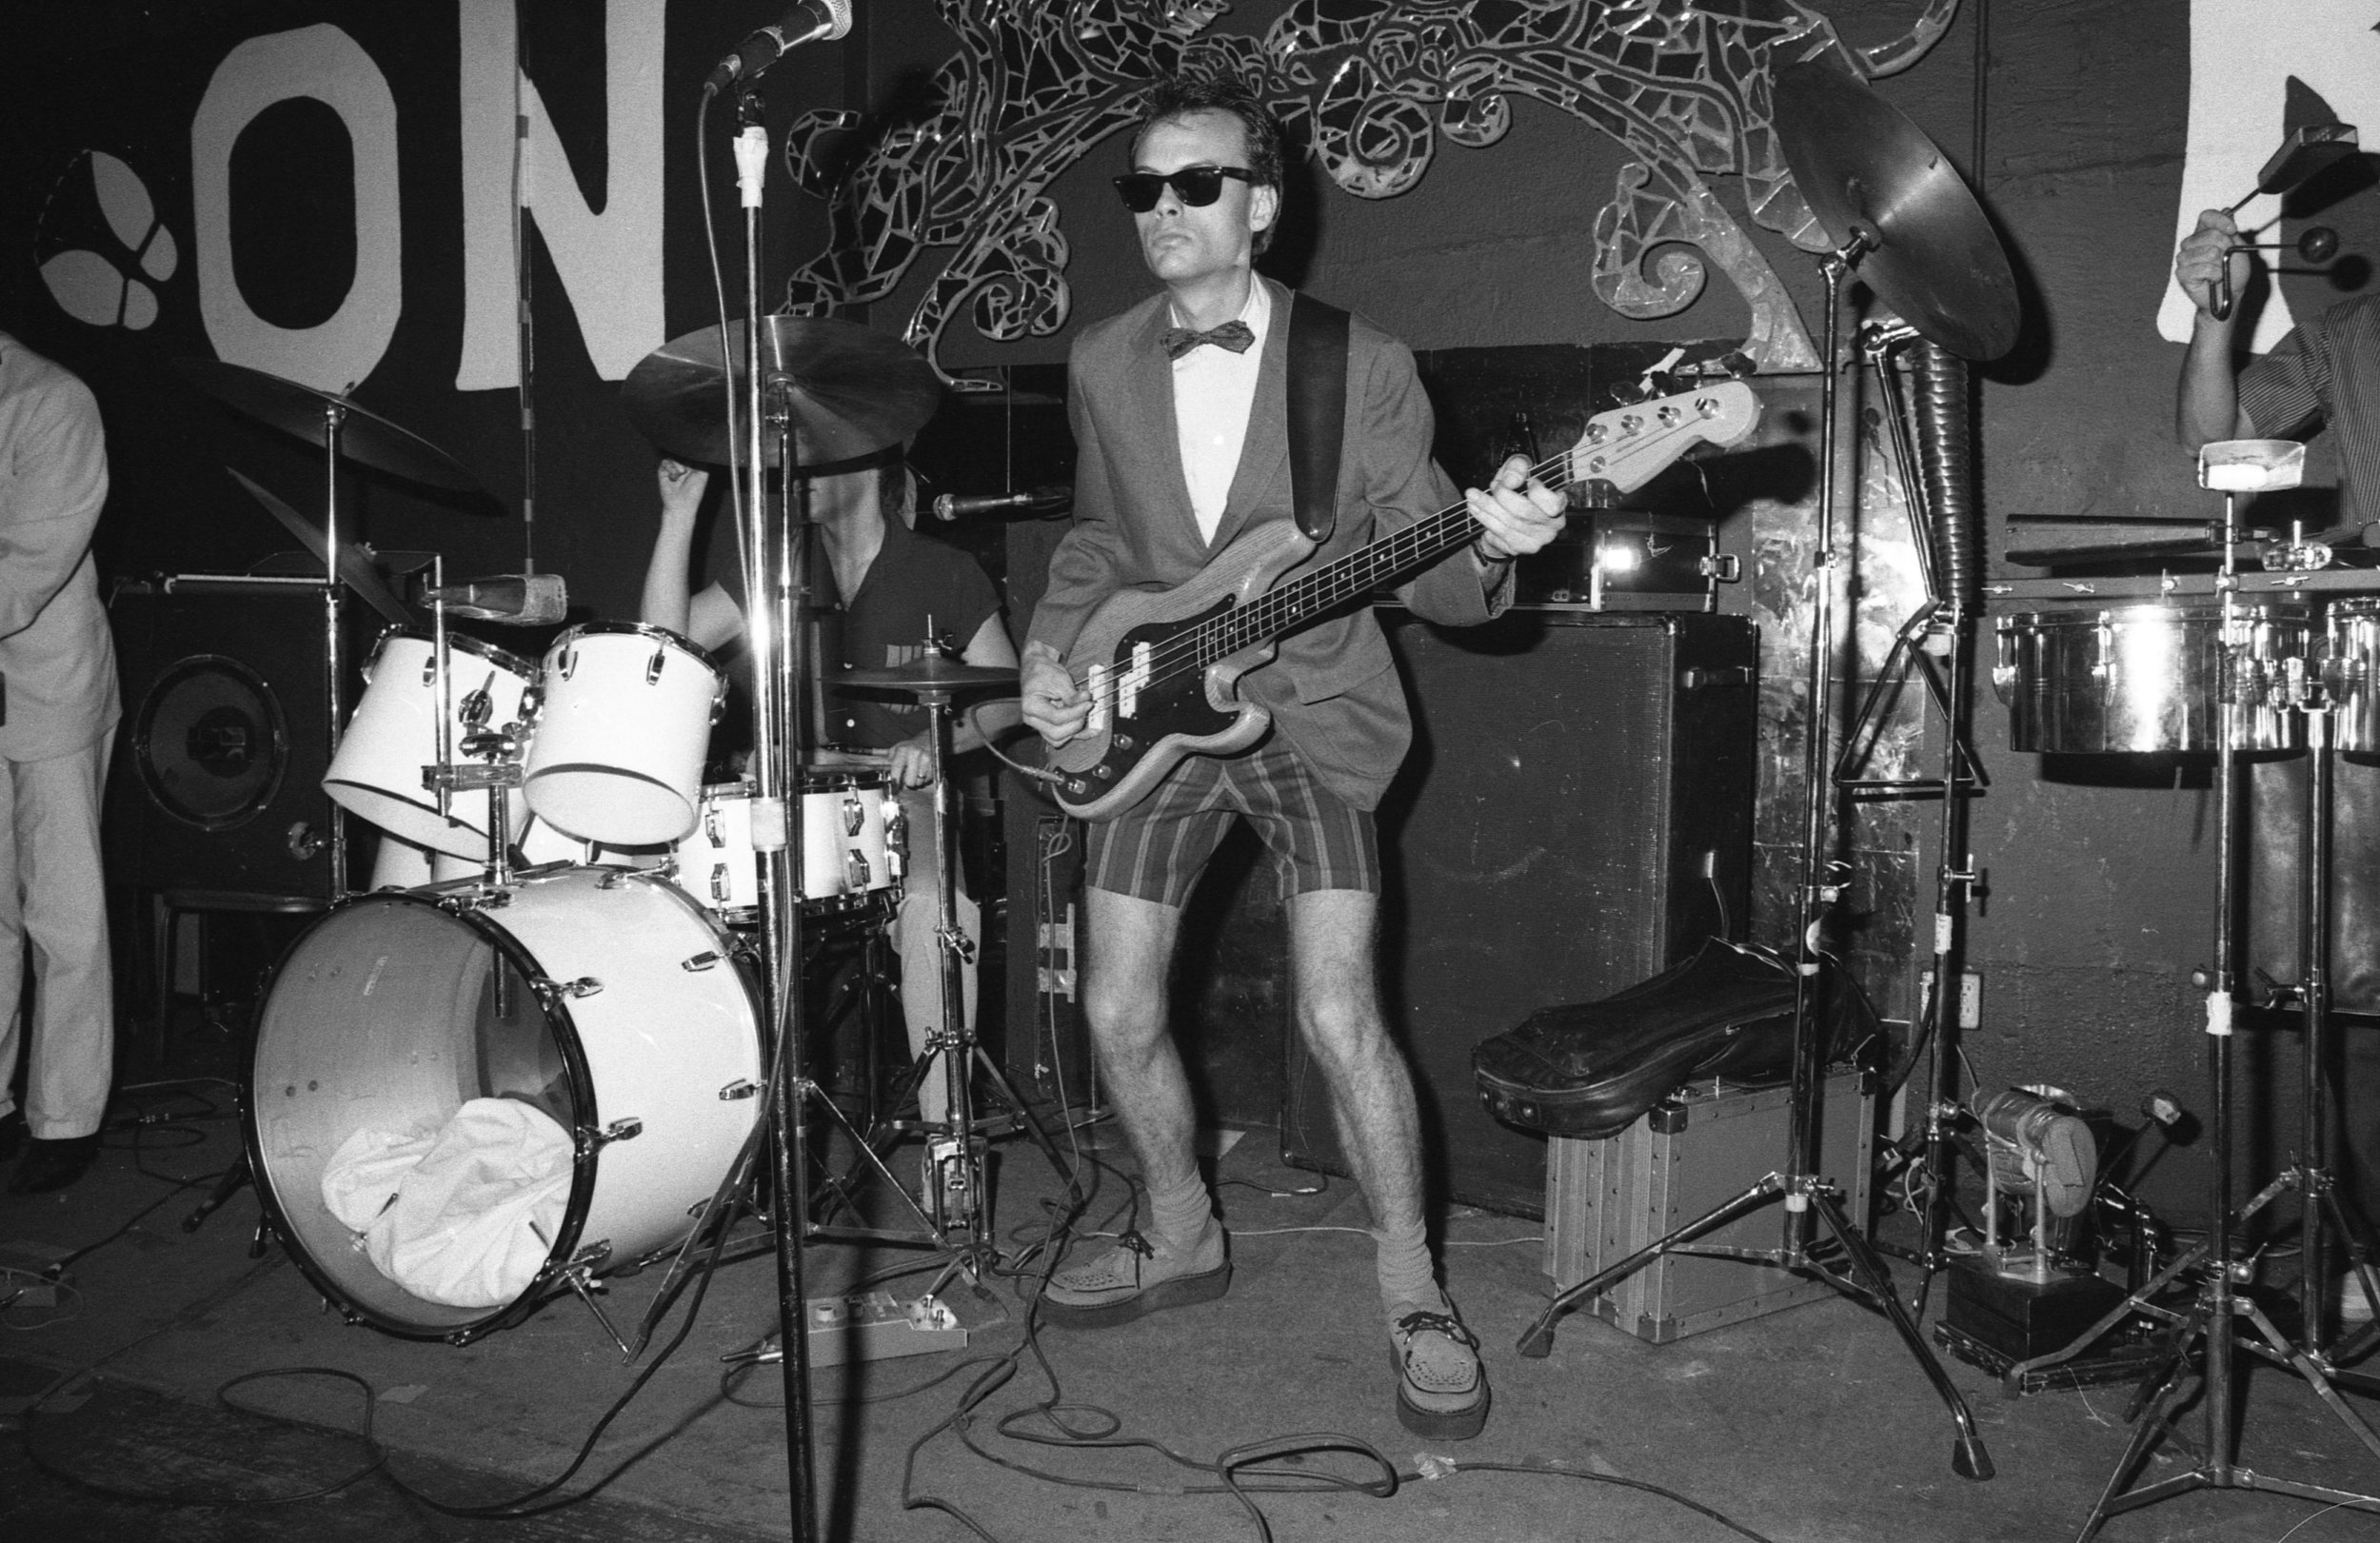 Billy Sheets and Undercover at the On Klub, Los Angeles, about 1981.